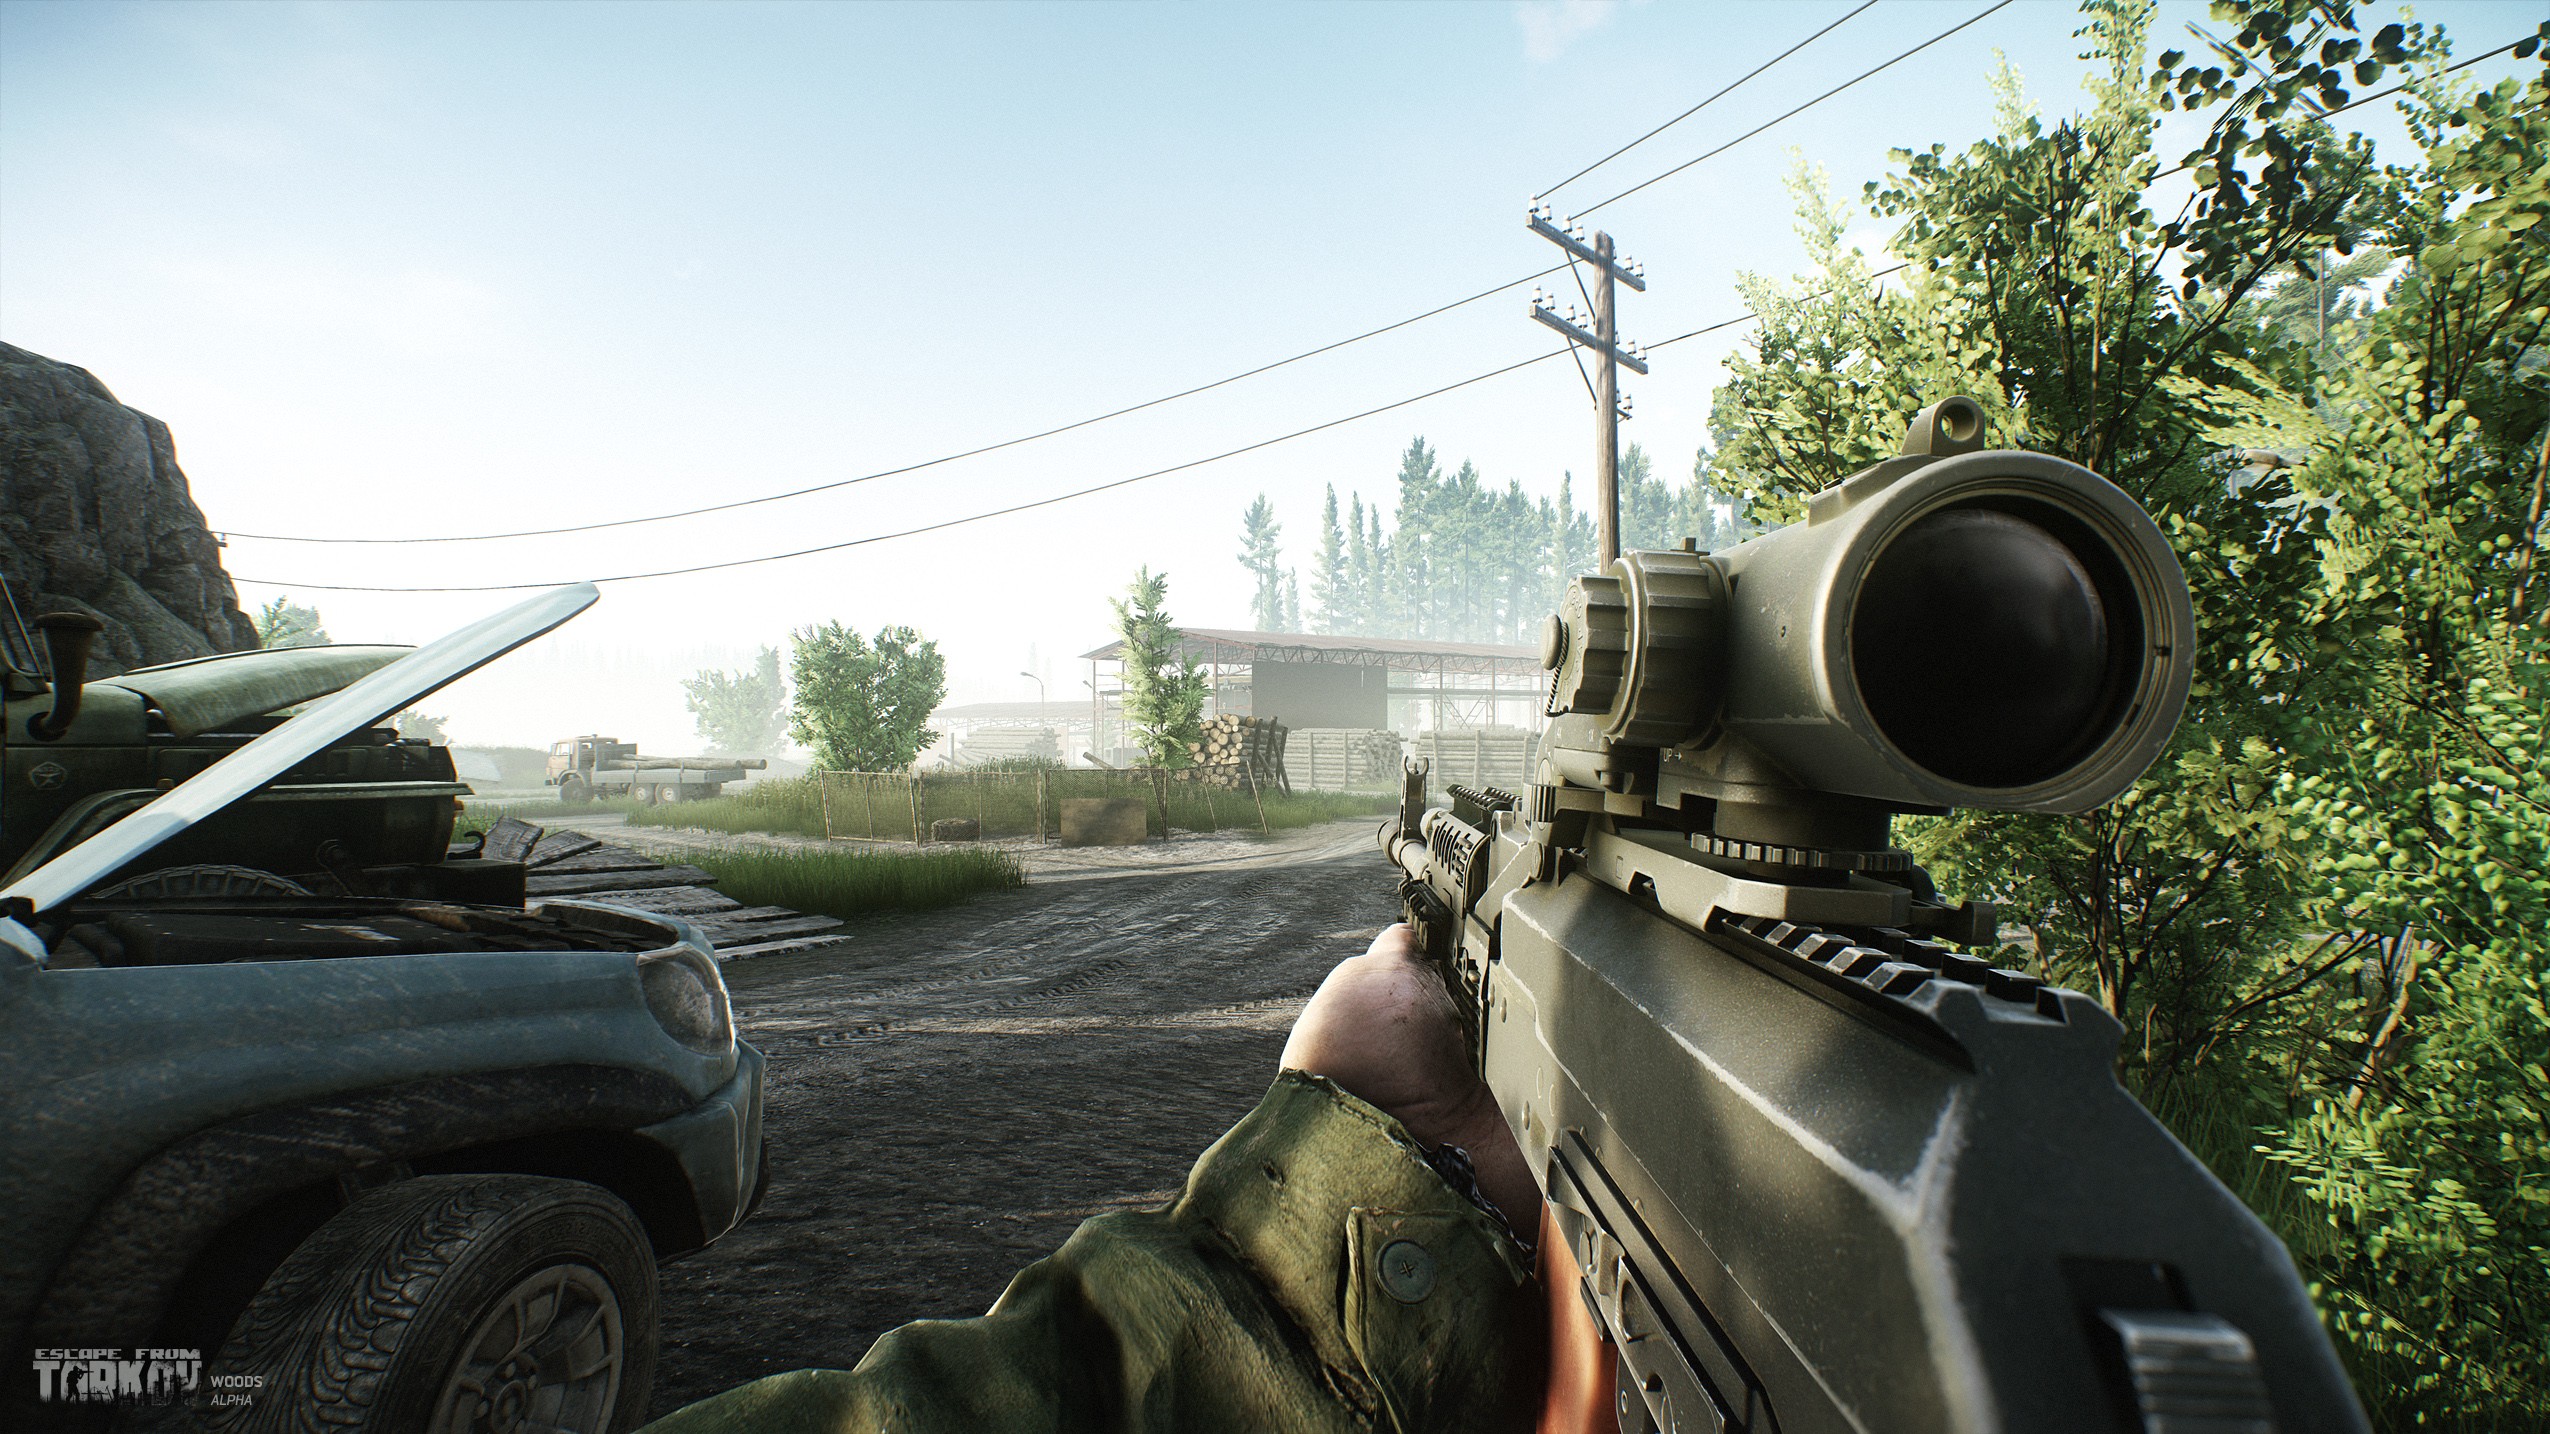 Escape from Tarkov, Videojuegos, Video games, War Game, Tactical Game, Mmorpg, First person shooter Wallpaper